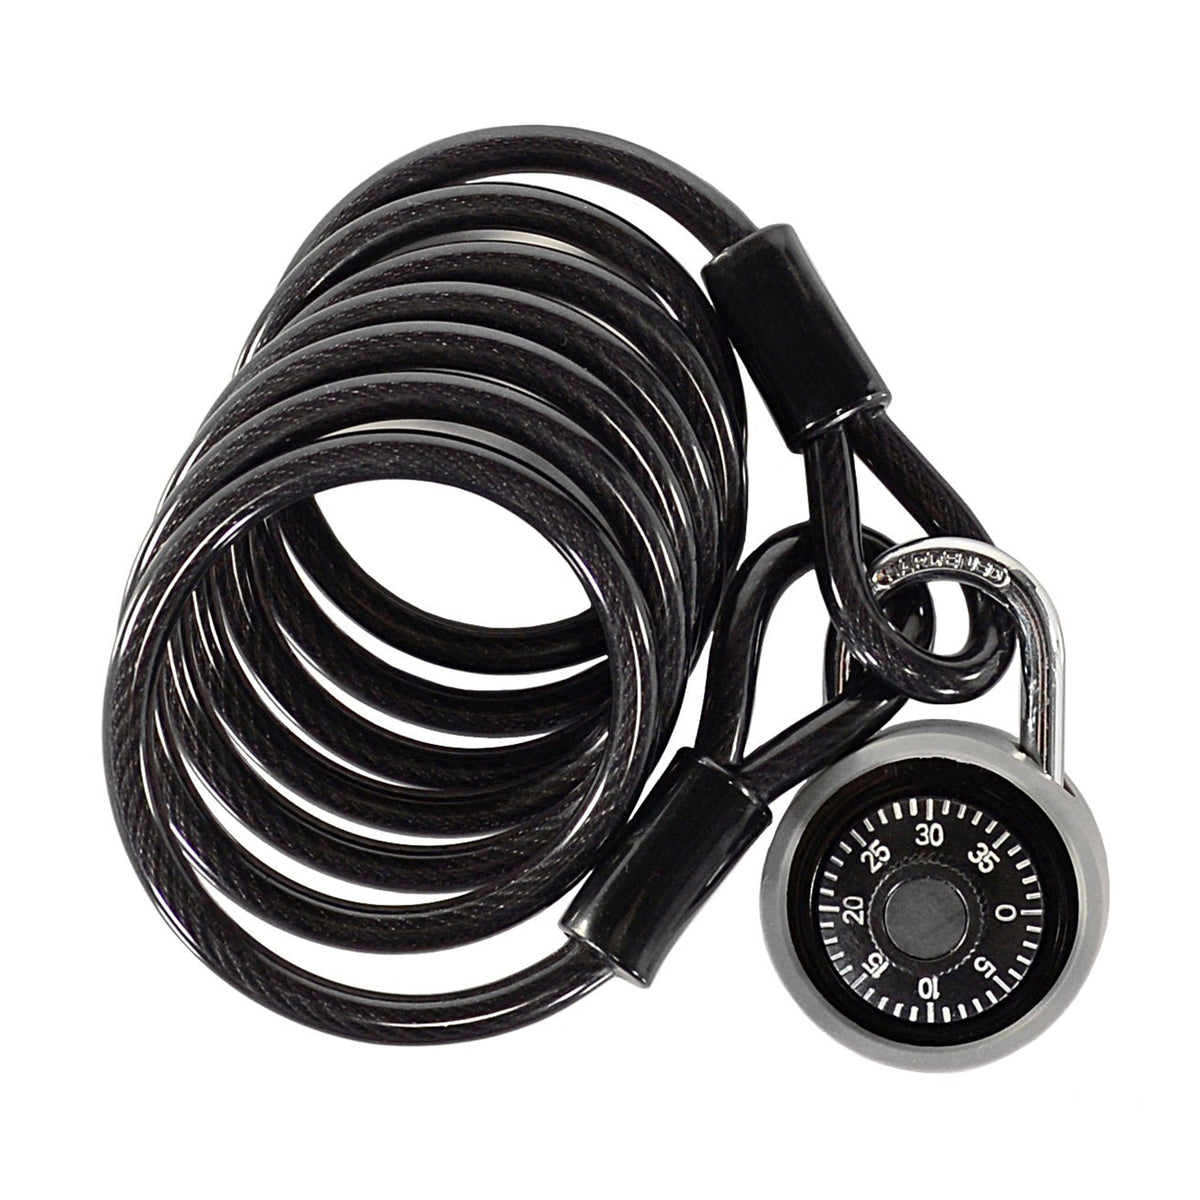 Capstone Combination Cable Lock | 6 ft. Length